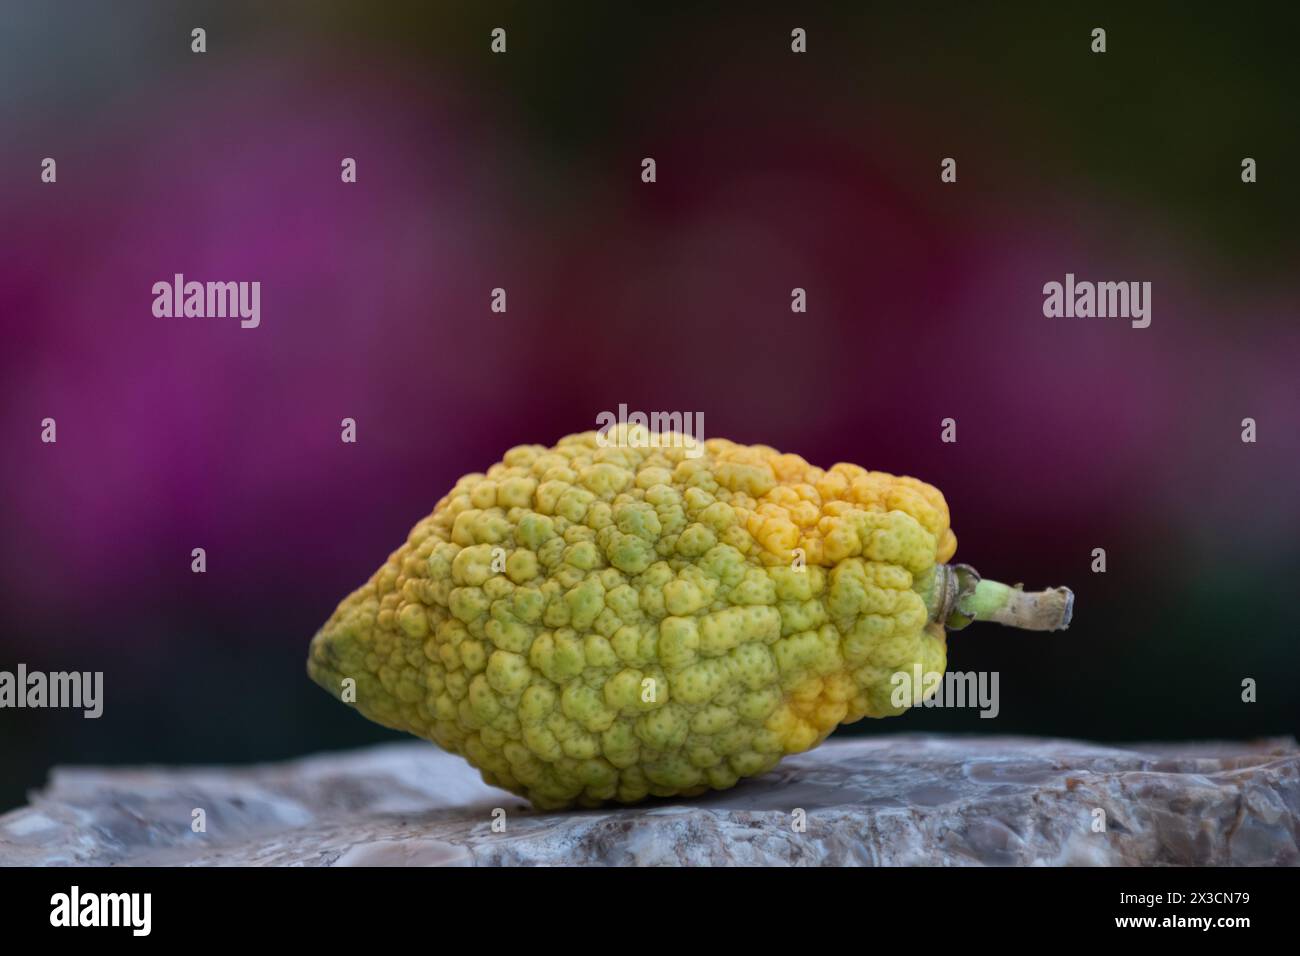 A single, multi-colored, yellow and green etrog or citron fruit, one of the four plant species used in the ritual observance of the Jewish holiday of Stock Photo